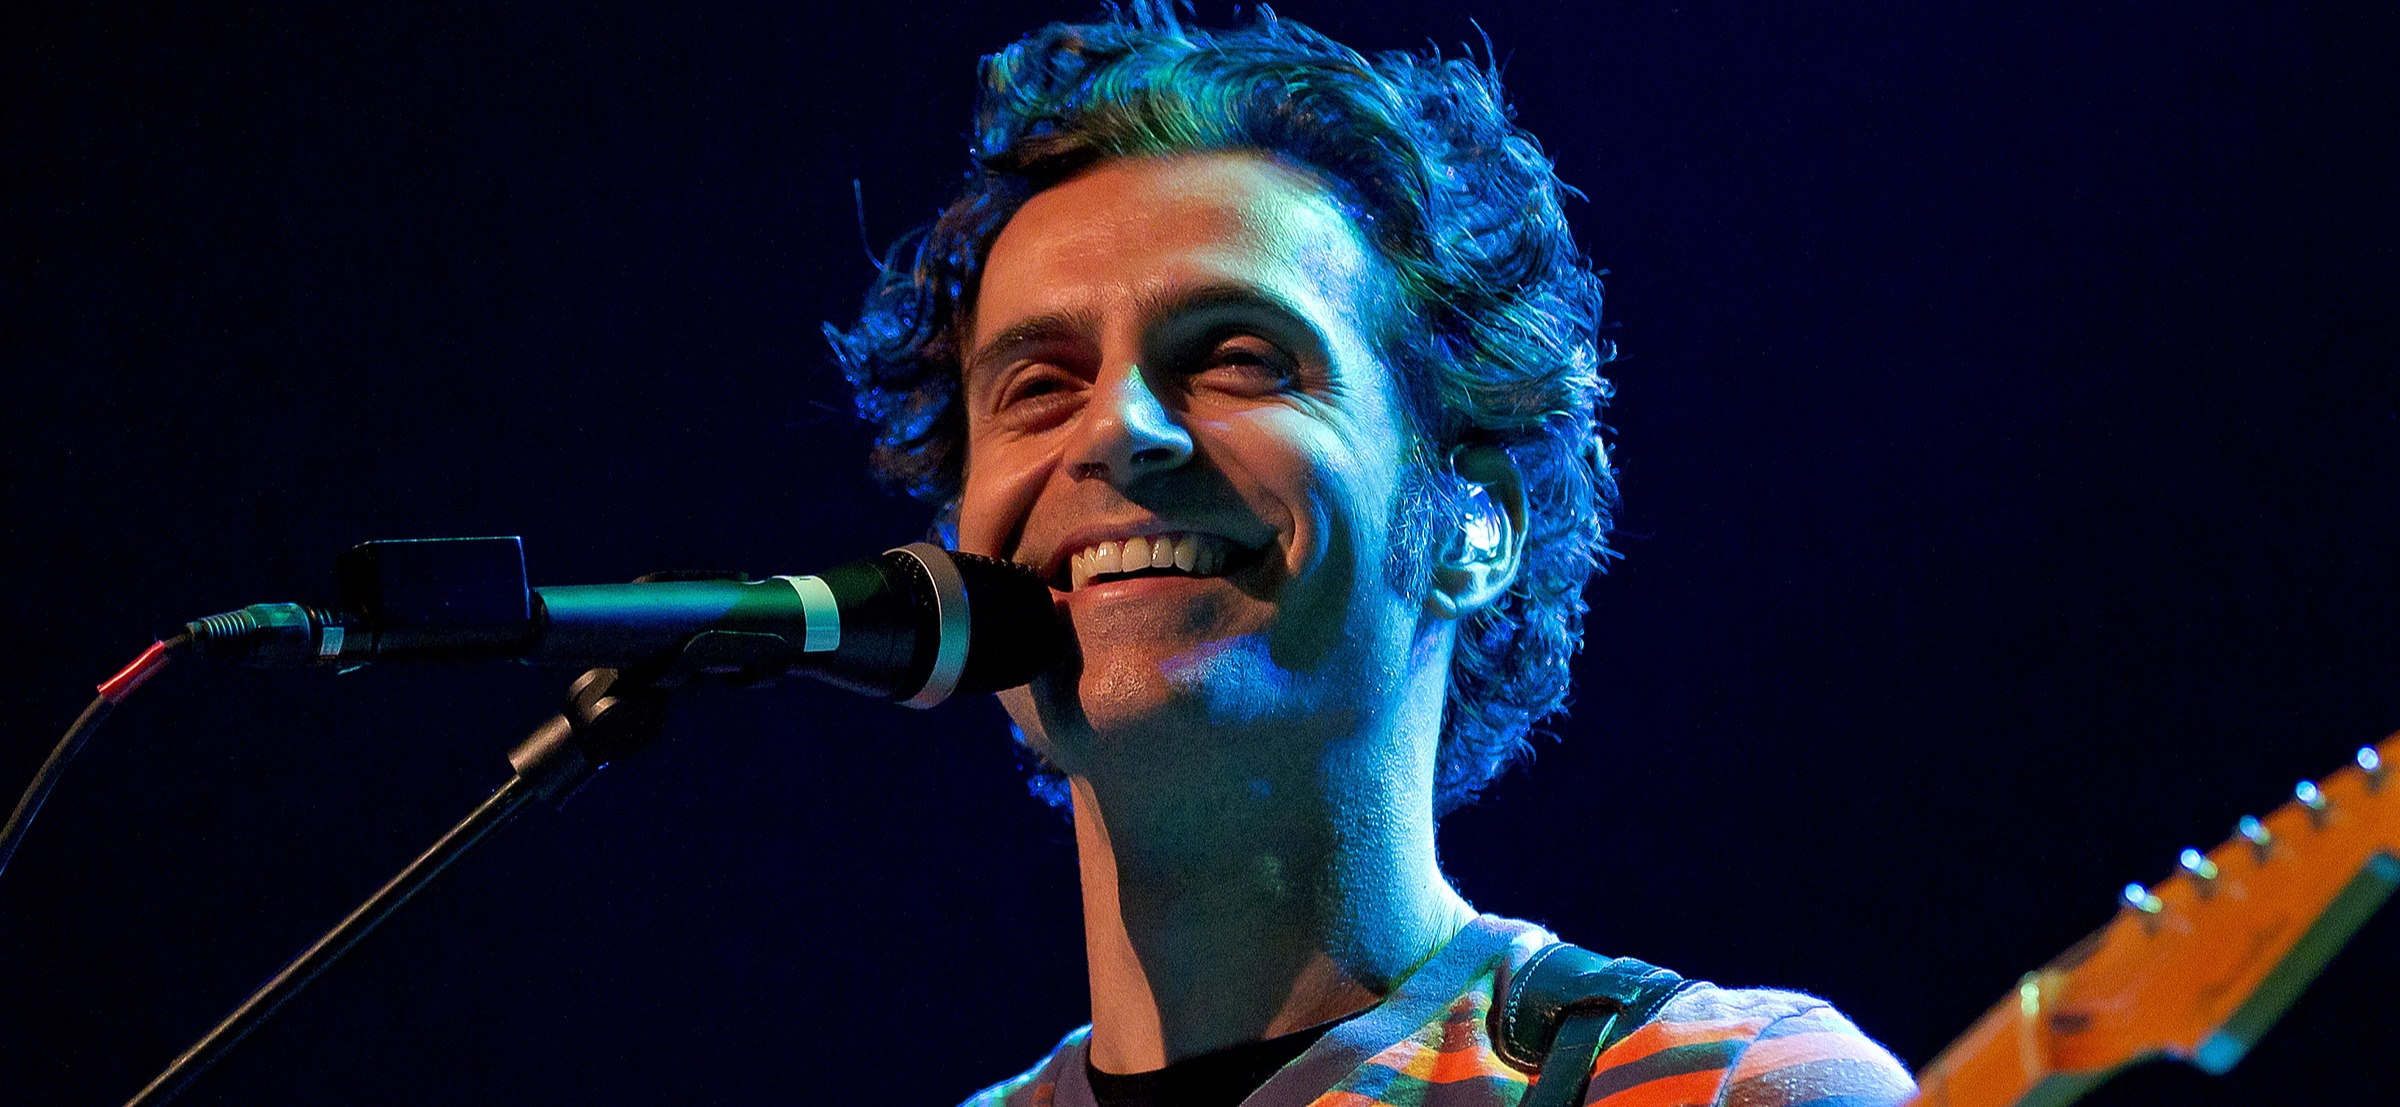 Dweezil Zappa Files For Divorce From Wife Megan Marsicano